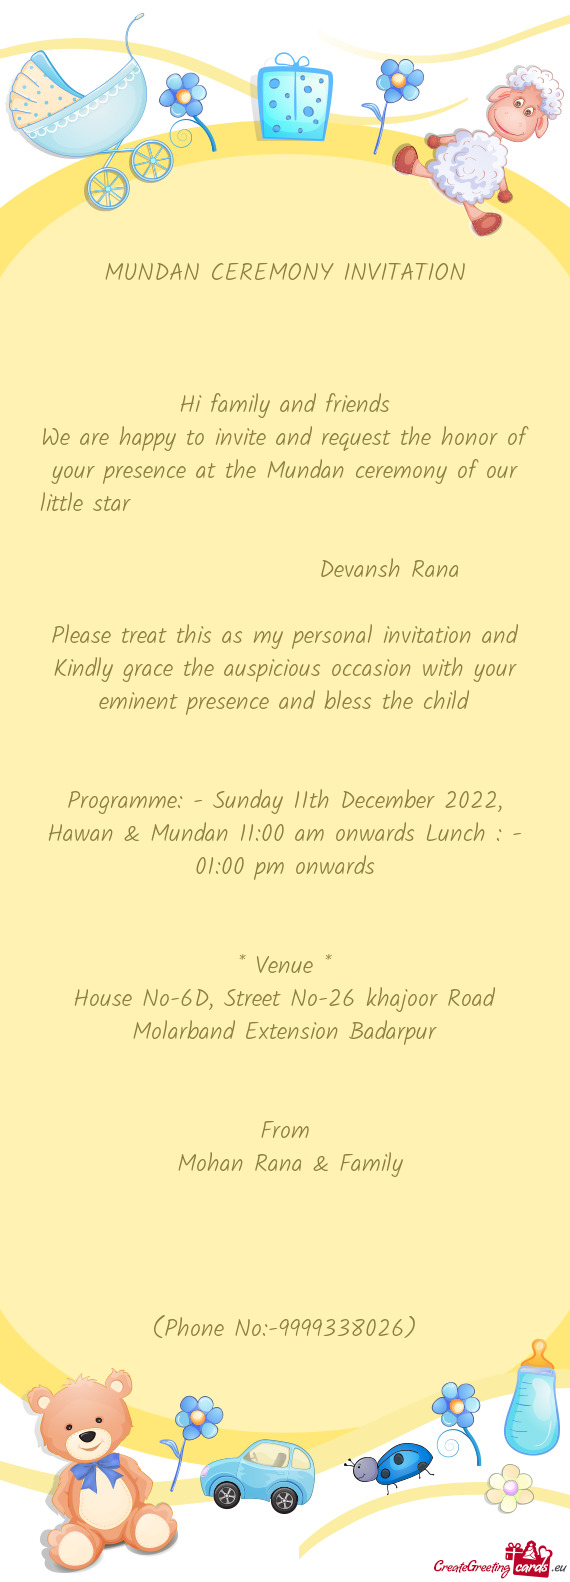 We are happy to invite and request the honor of your presence at the Mundan ceremony of our little s